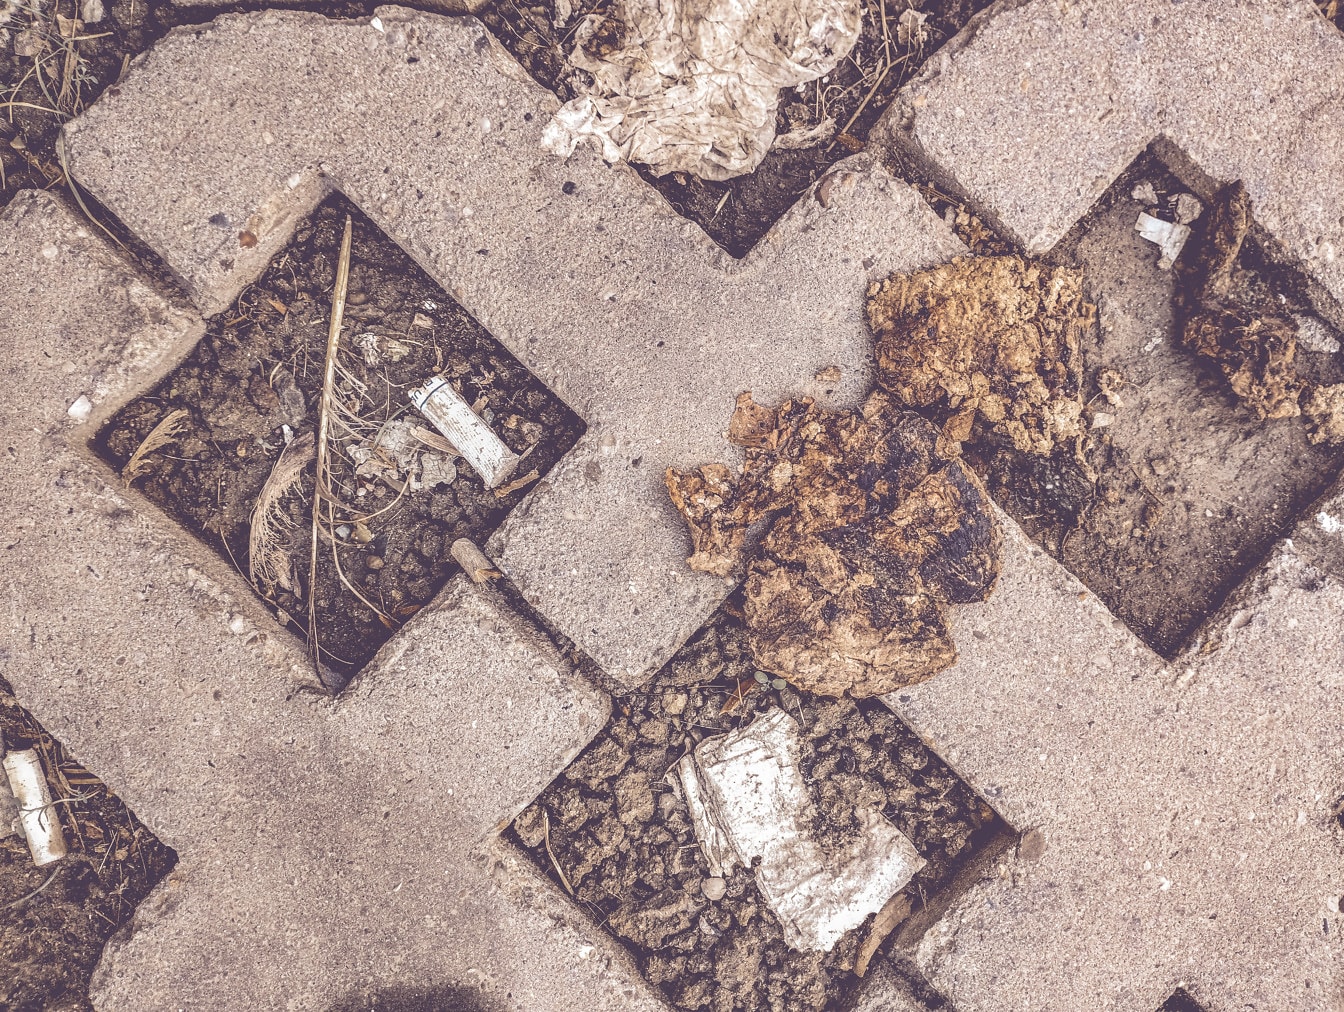 Garbage and excrement on concrete paving stone close-up